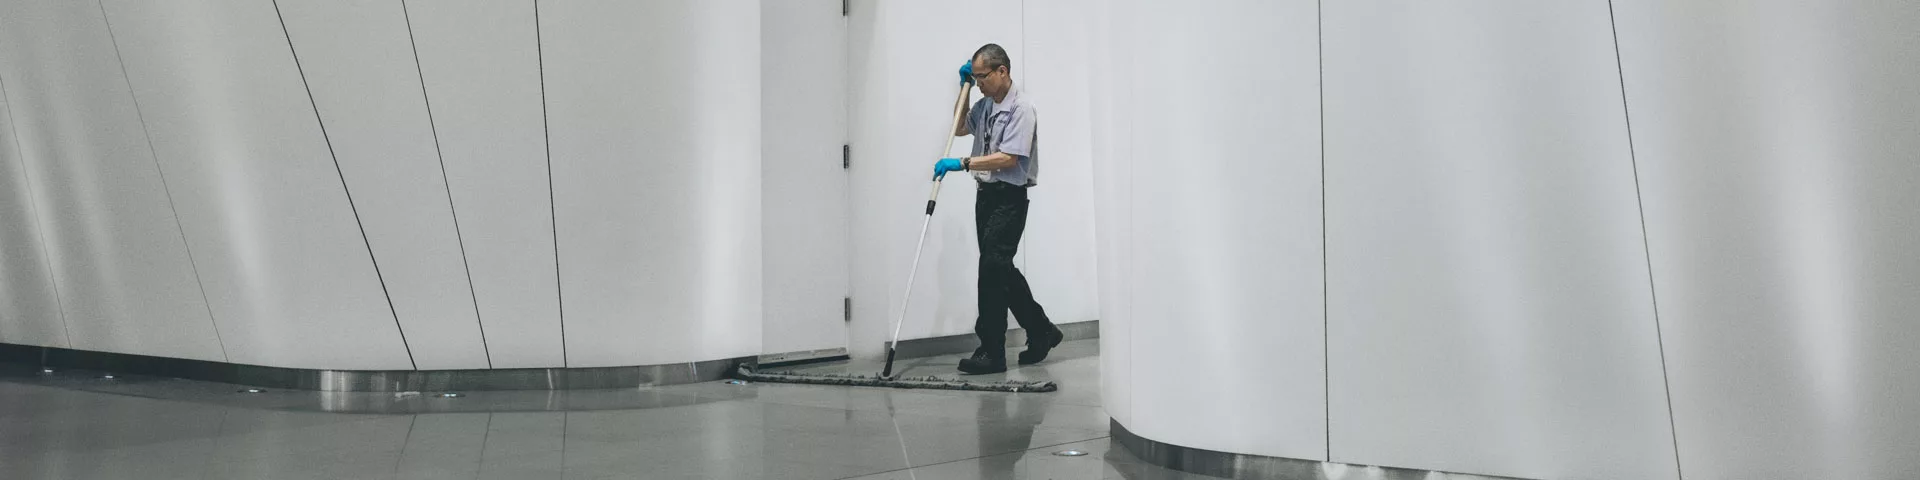 Janitor cleaning a commercial building